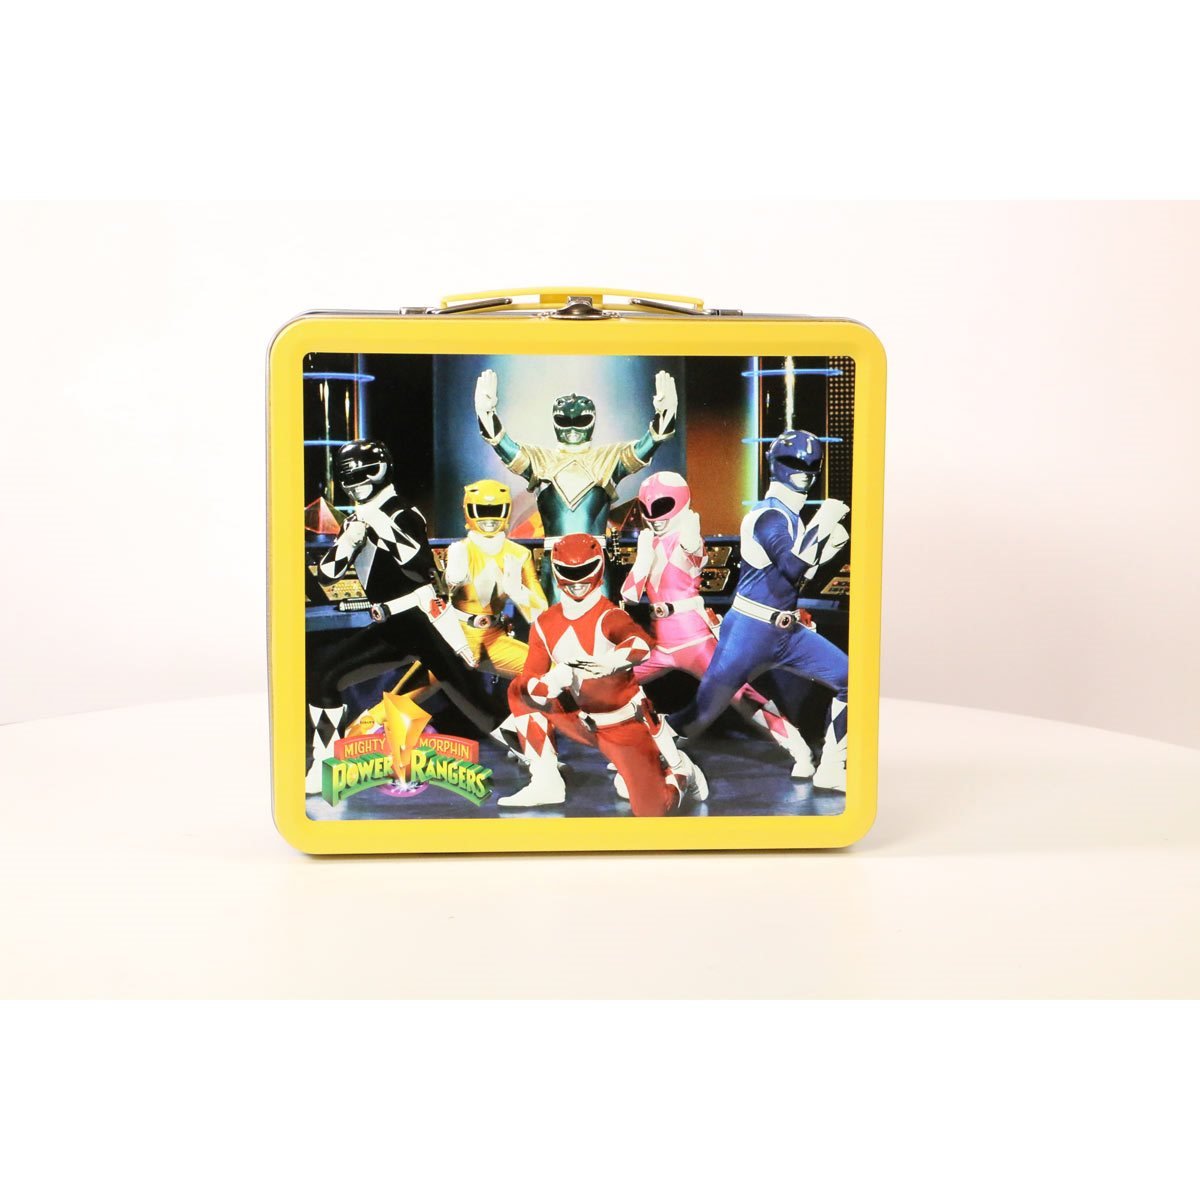 Teen Titans Go! To Go Metal Lunch Box